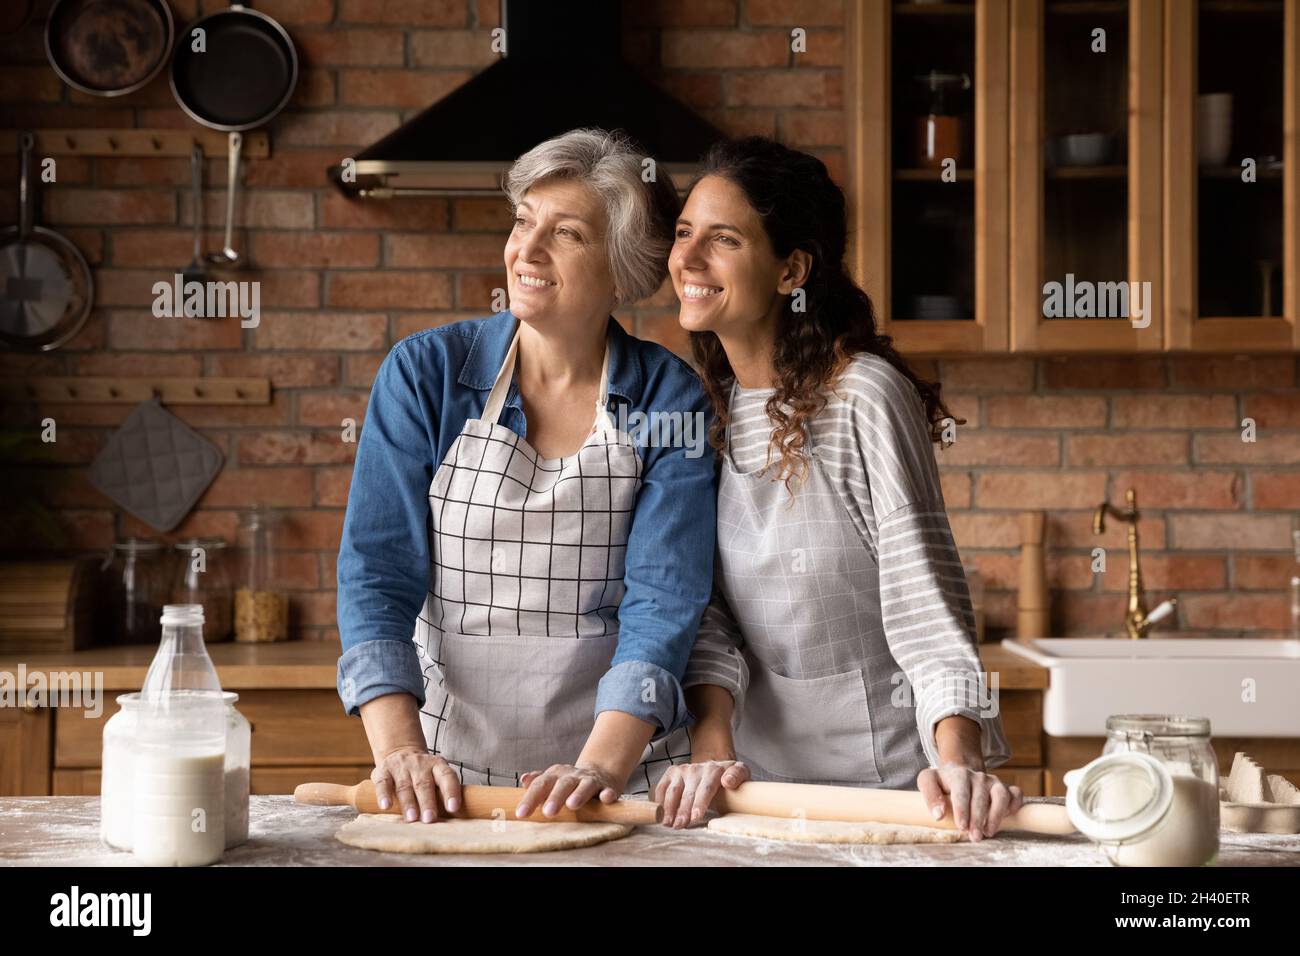 Happy mature 60s mother and grown daughter woman baking pie Stock Photo